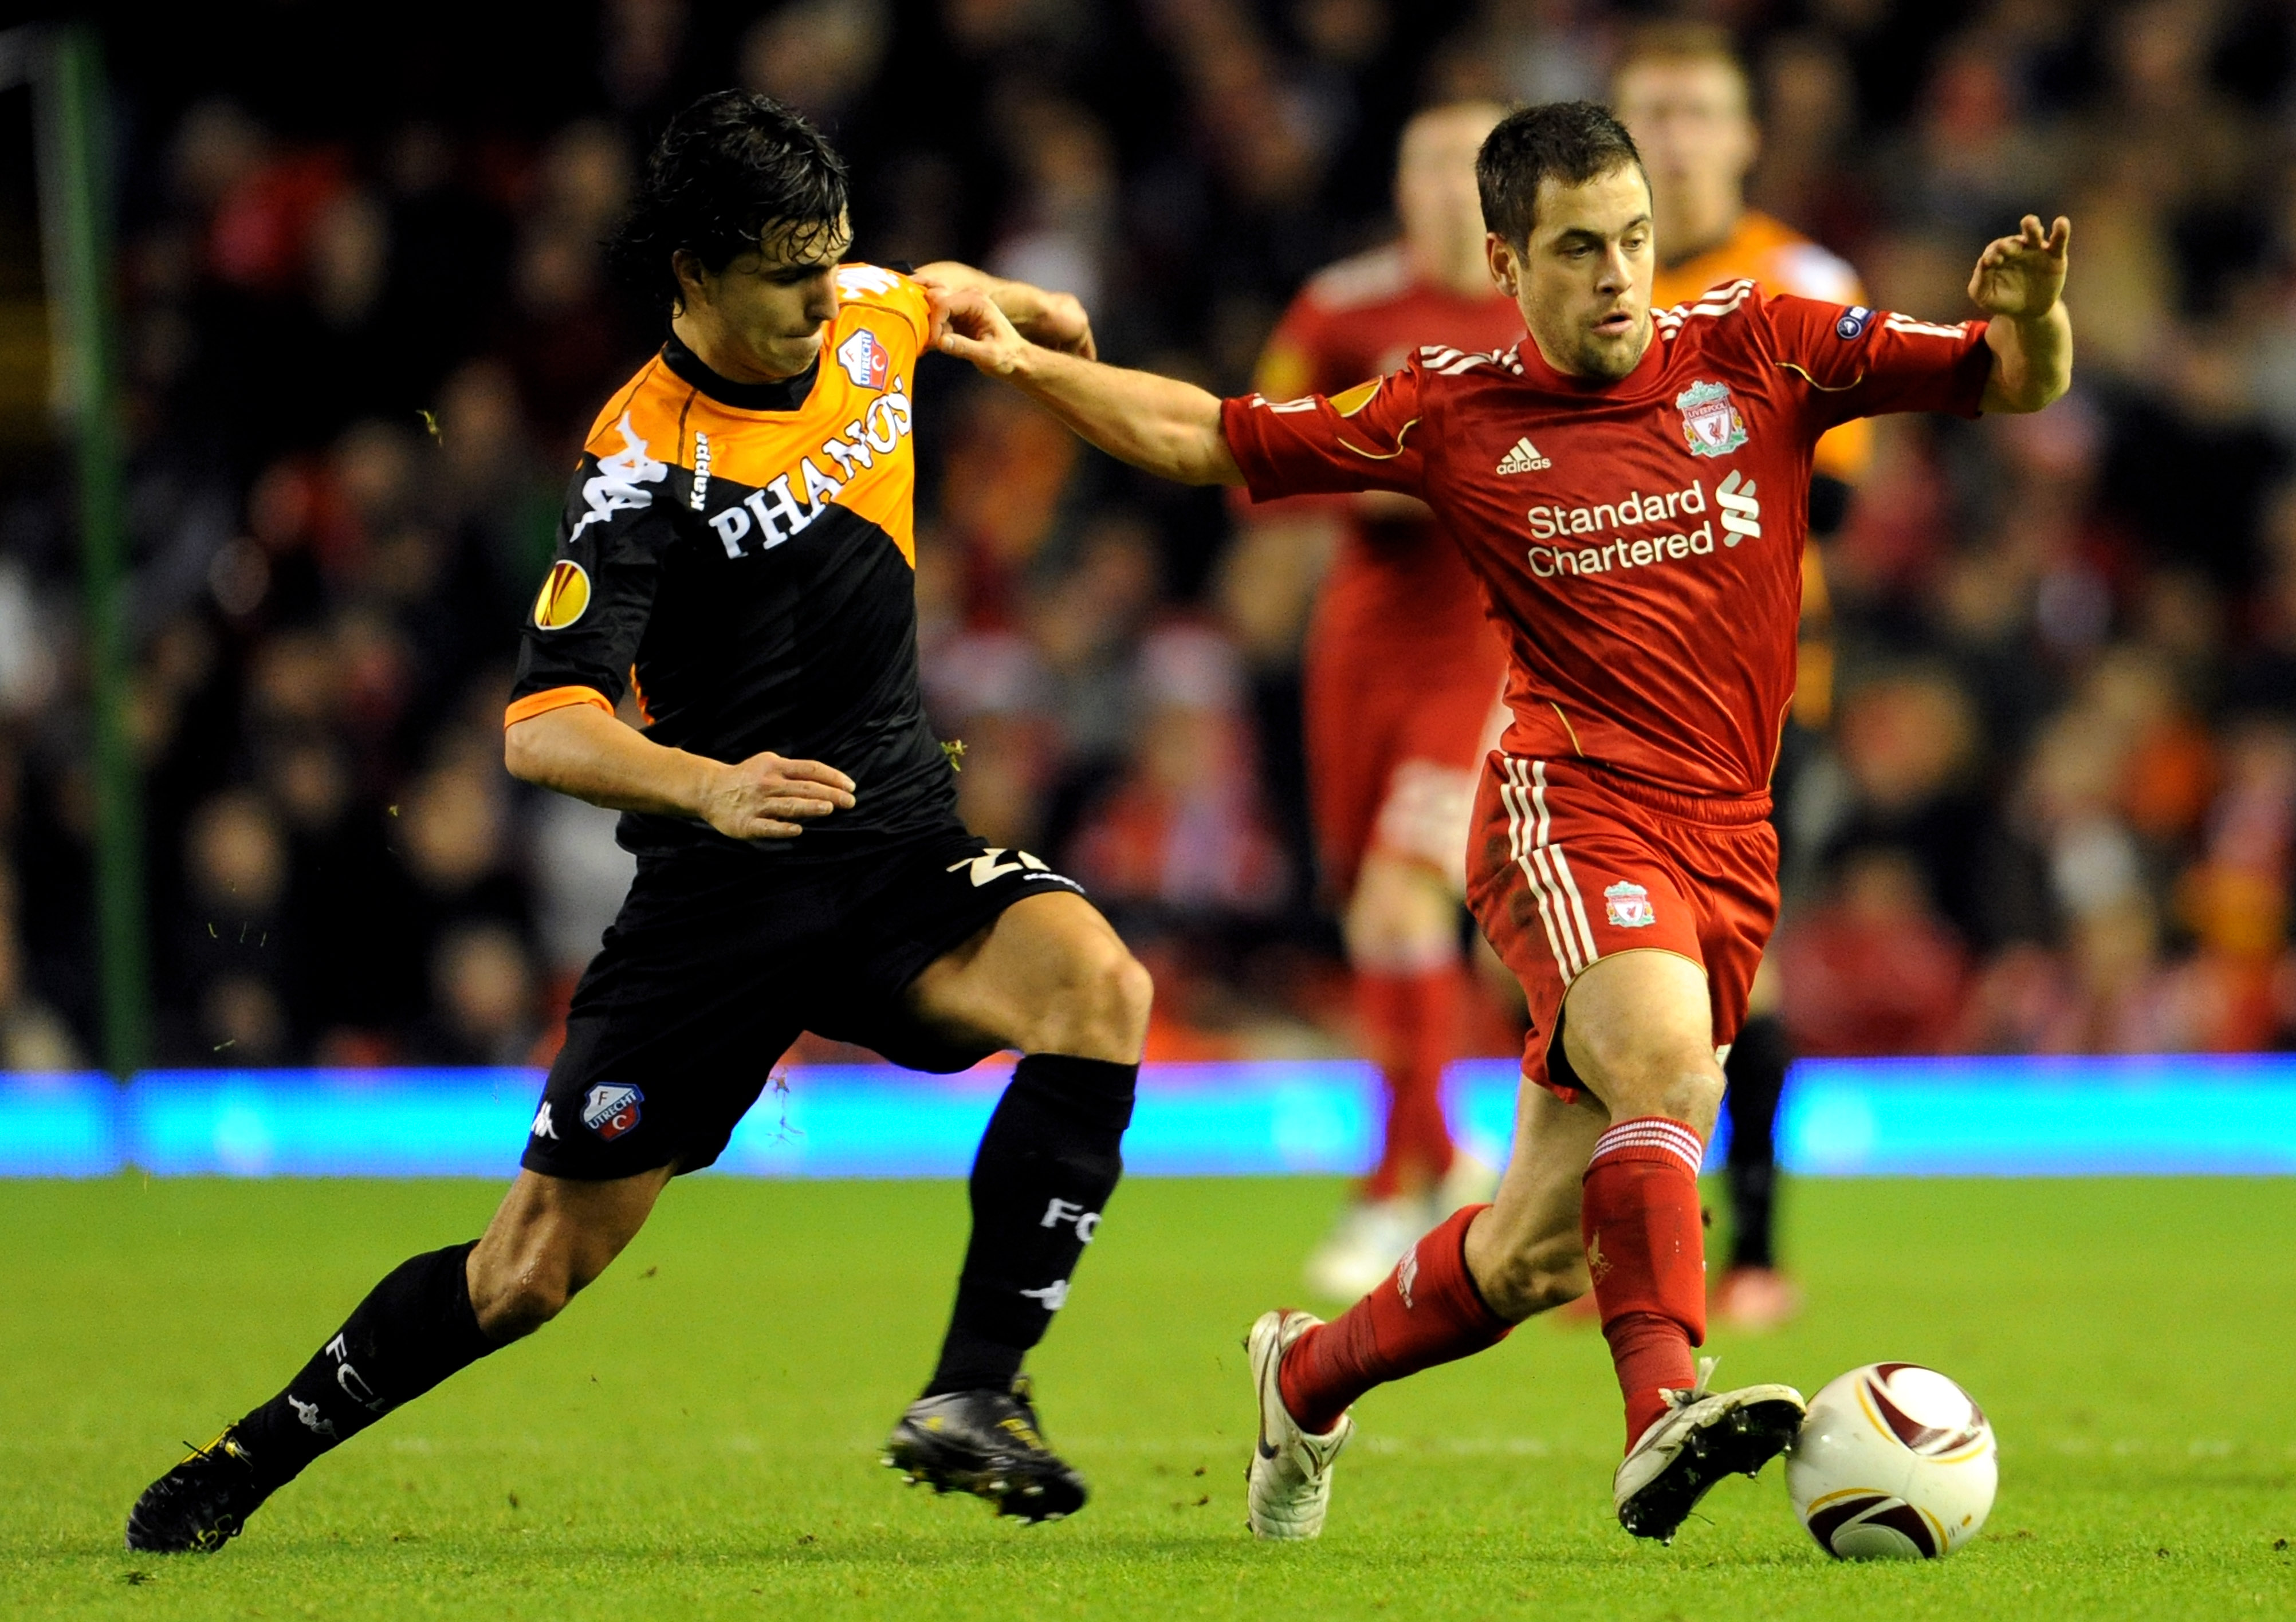 LIVERPOOL, ENGLAND - DECEMBER 15:  Joe Cole of Liverpool is challenged by Gianluca Nijholt of FC Utrecht during the UEFA Europa League Group K match between Liverpool and FC Utrecht at Anfield on December 15, 2010 in Liverpool, England.  (Photo by Clint H